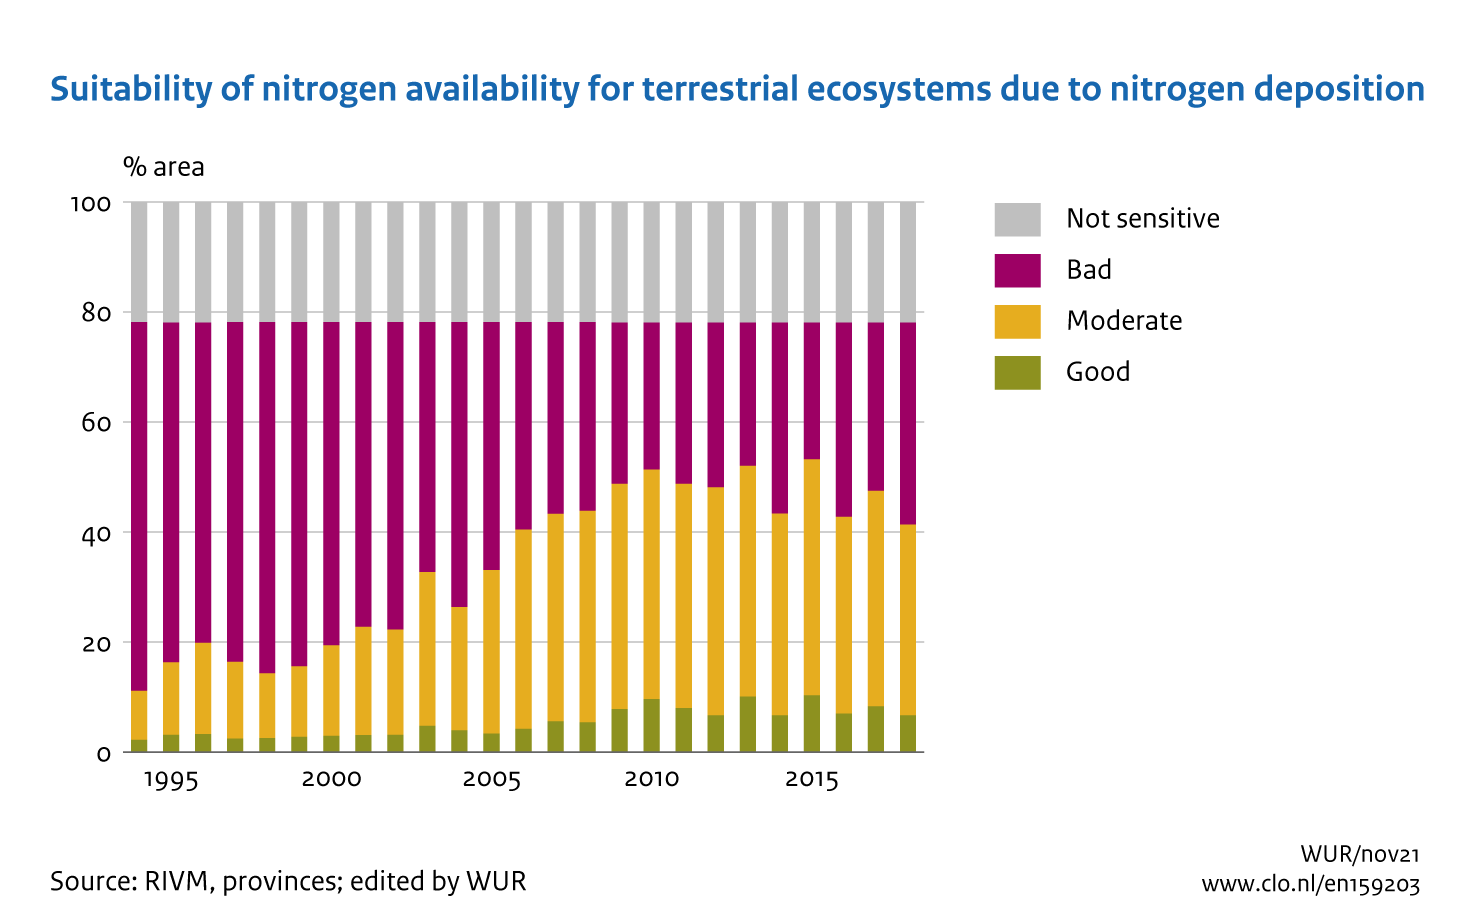 Image Suitability of nitrogen availability for terrestrial ecosystems due to nitrogen deposition. The image is further explained in the text.